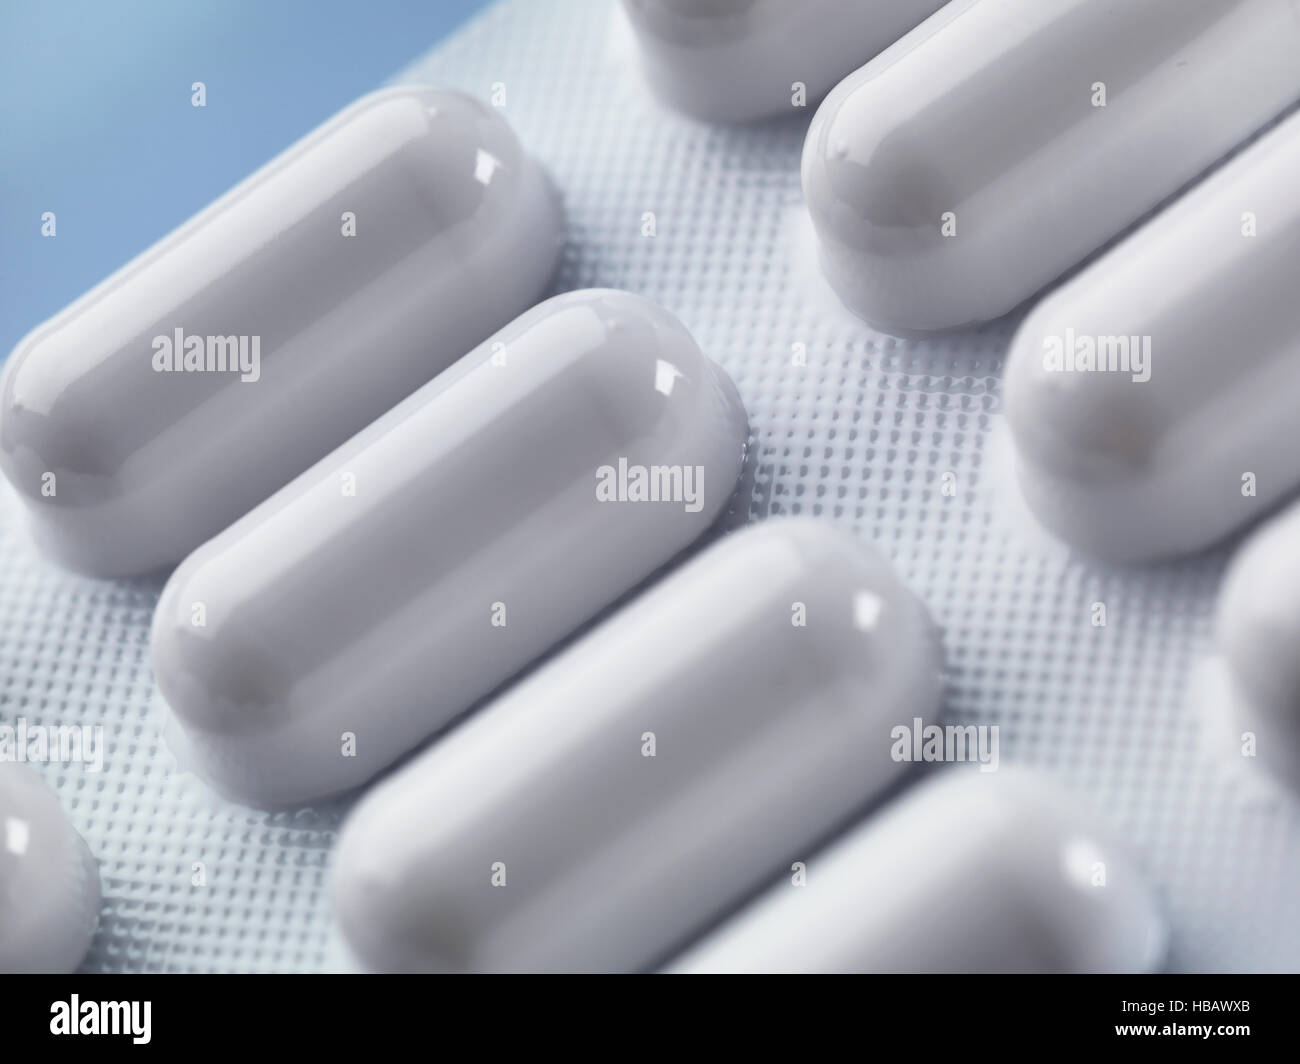 Complete course of drugs in foil packaging Stock Photo